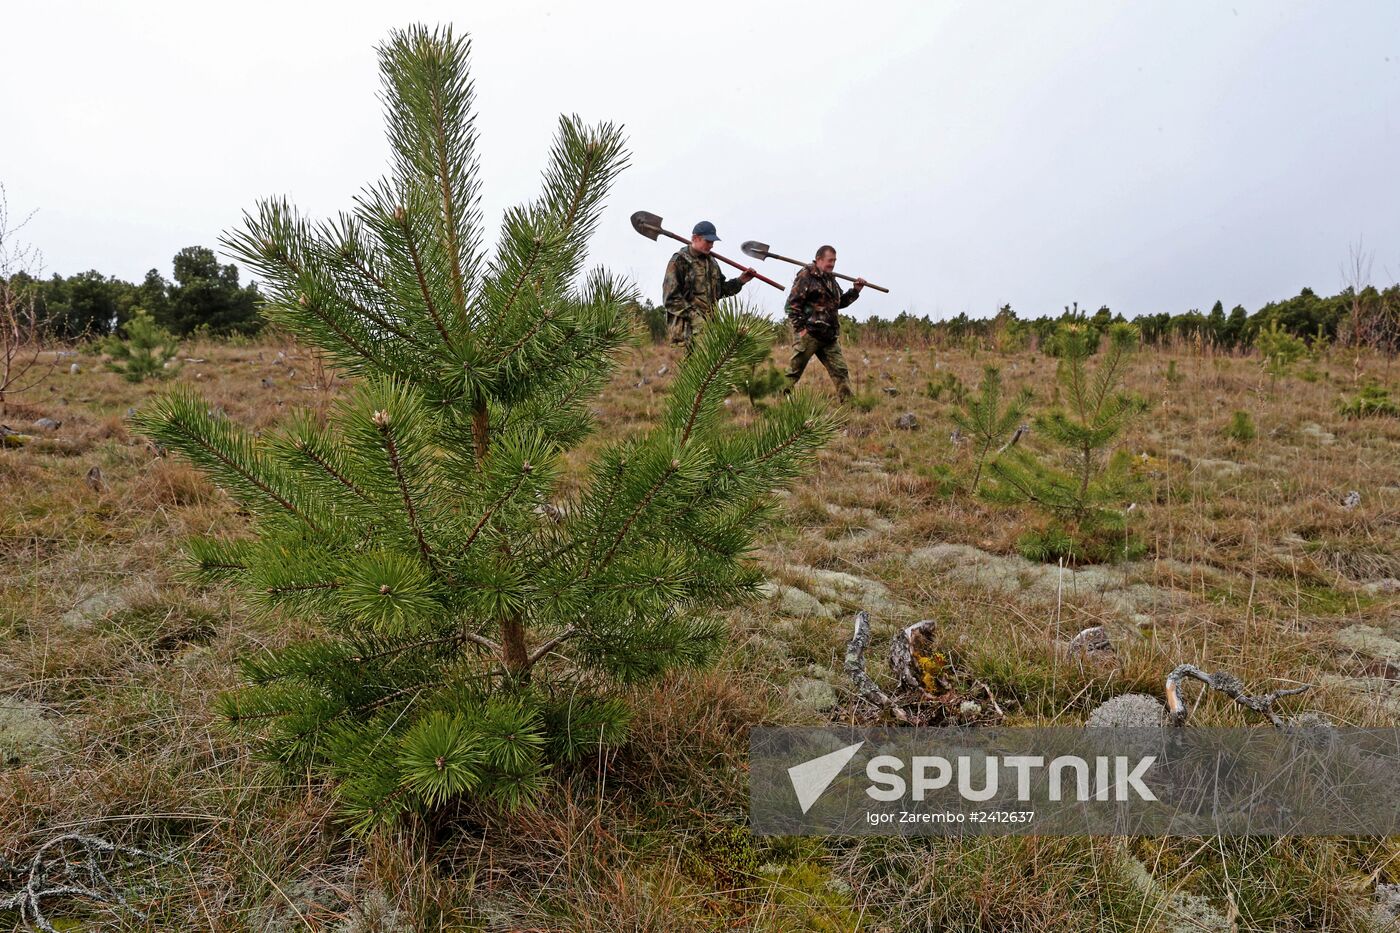 Planting pine seedlings in Curonian Spit